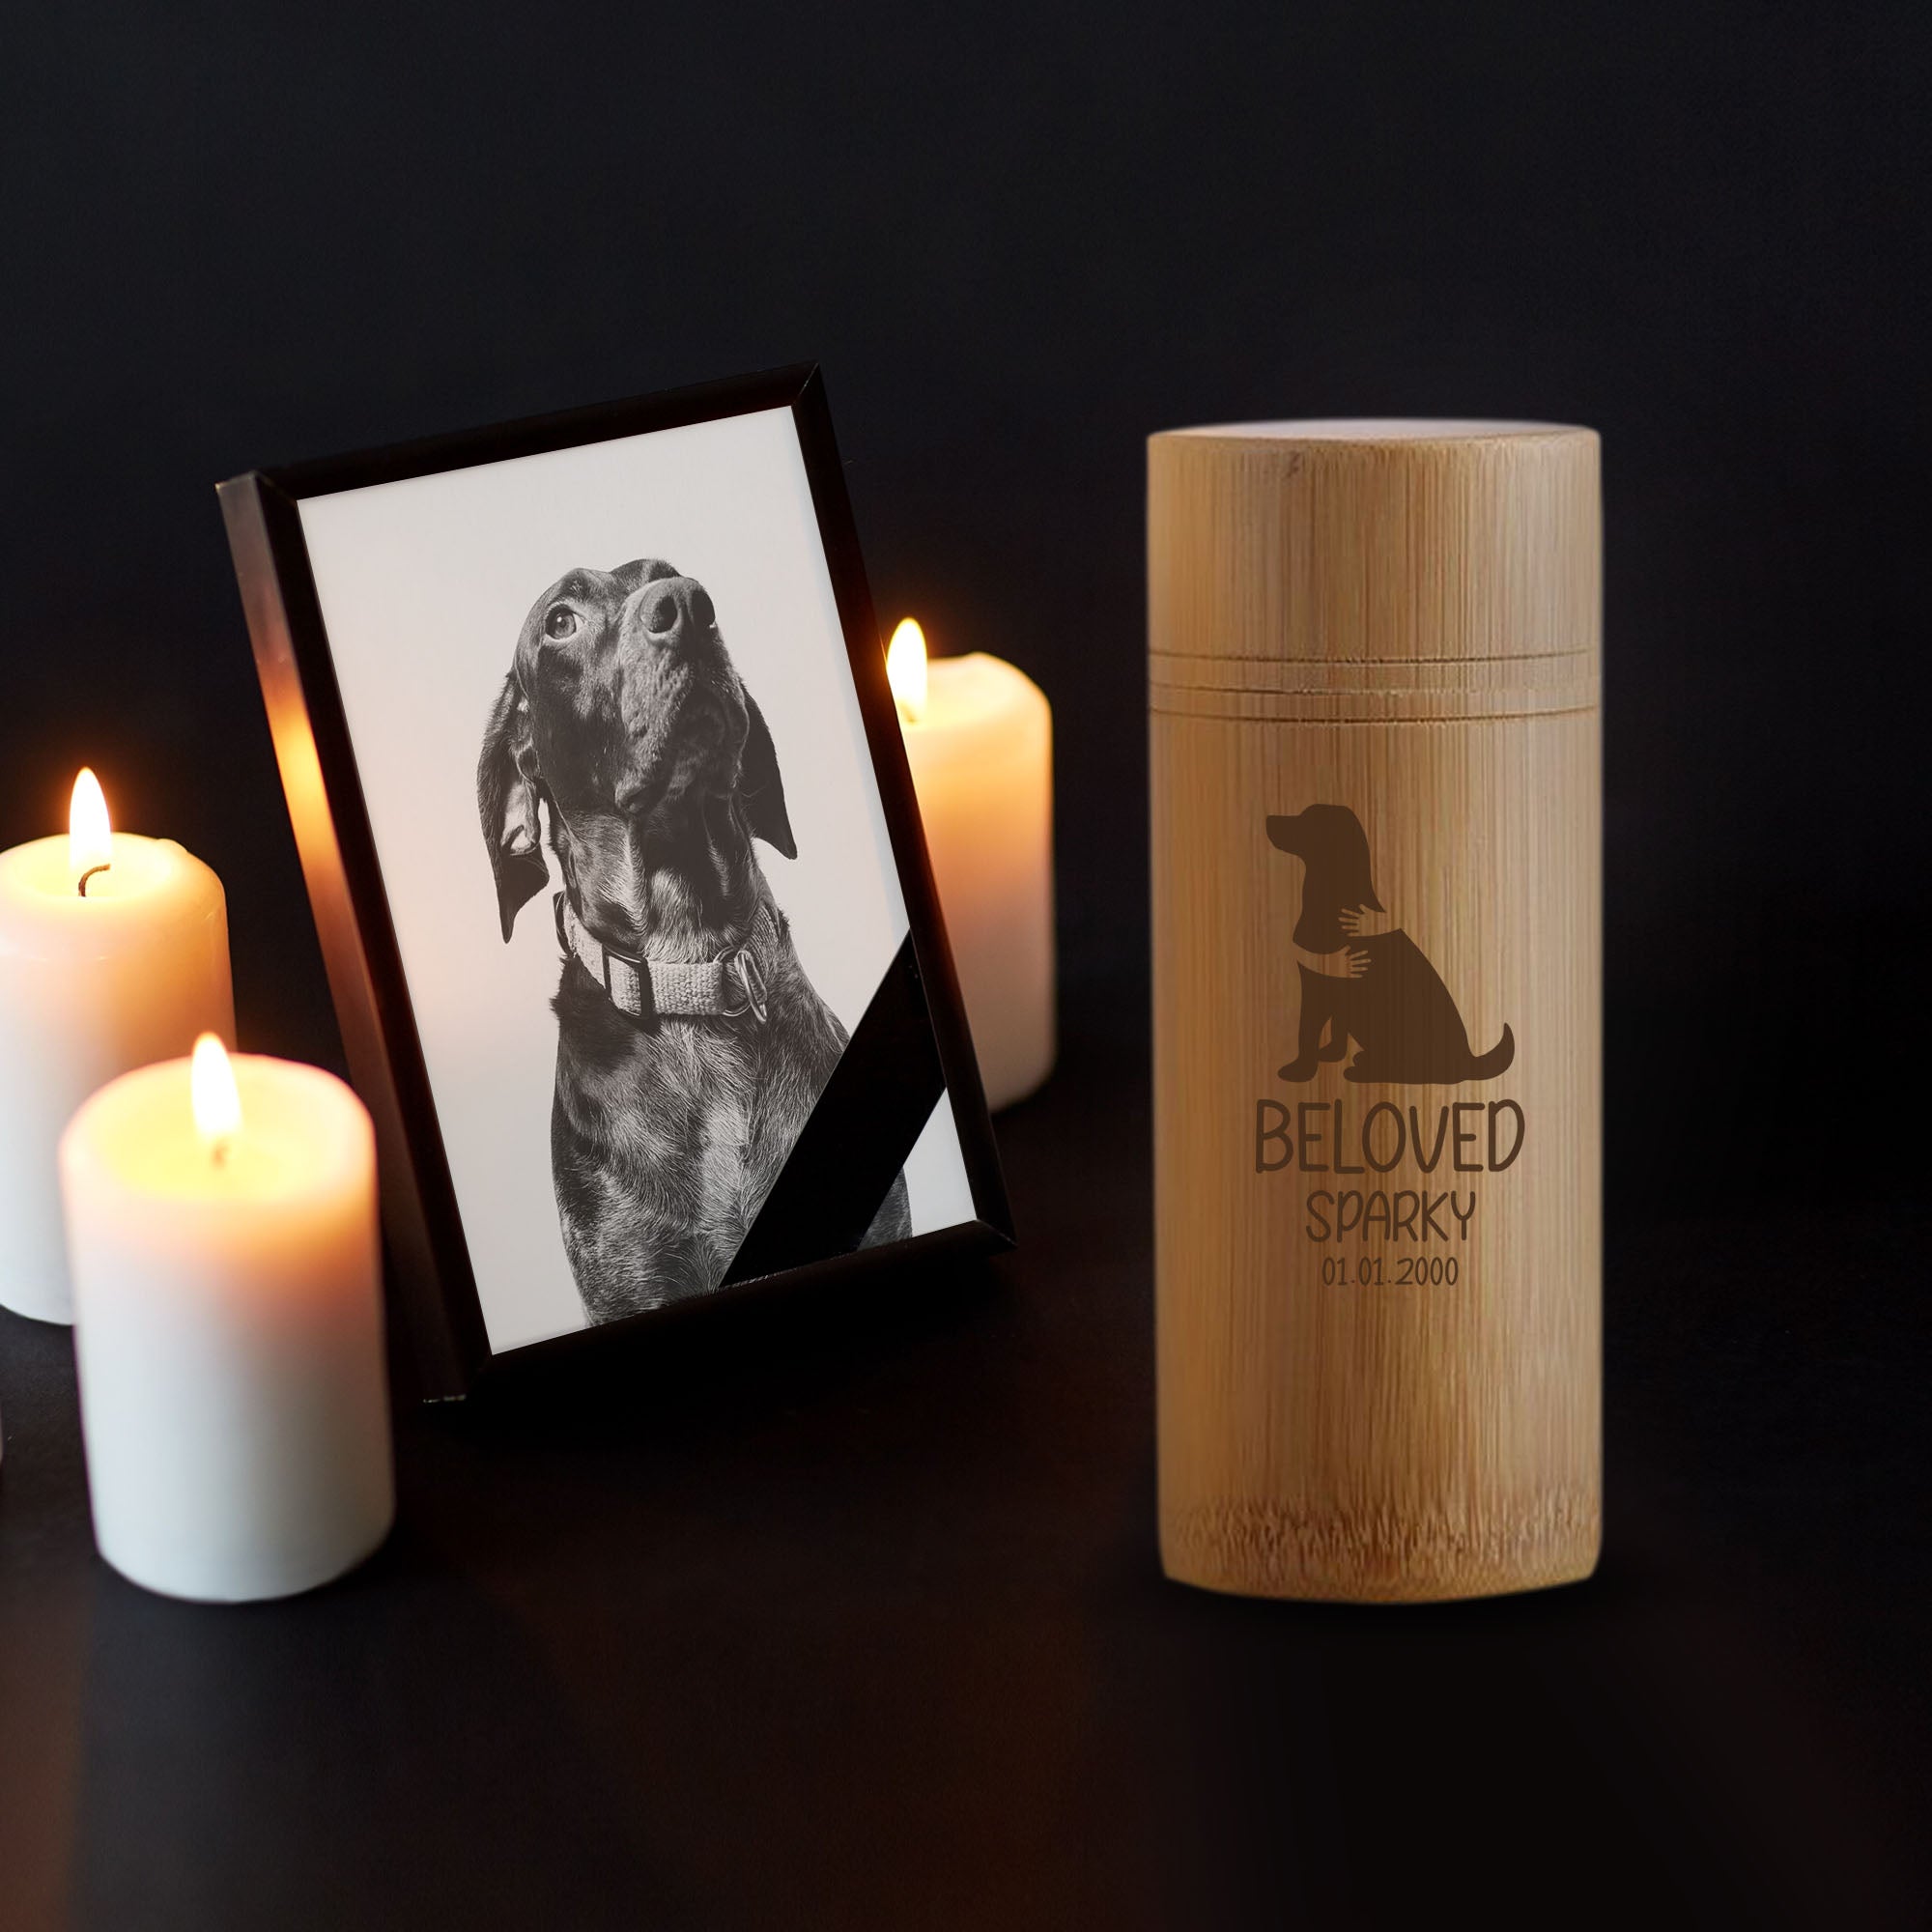 Personalized Custom Bamboo Tube Urn for Cat Pet Ashes: Environmentally Friendly Cremation Urn for Scattering, Burial, or Display Options - Pet Size up to 35 lbs